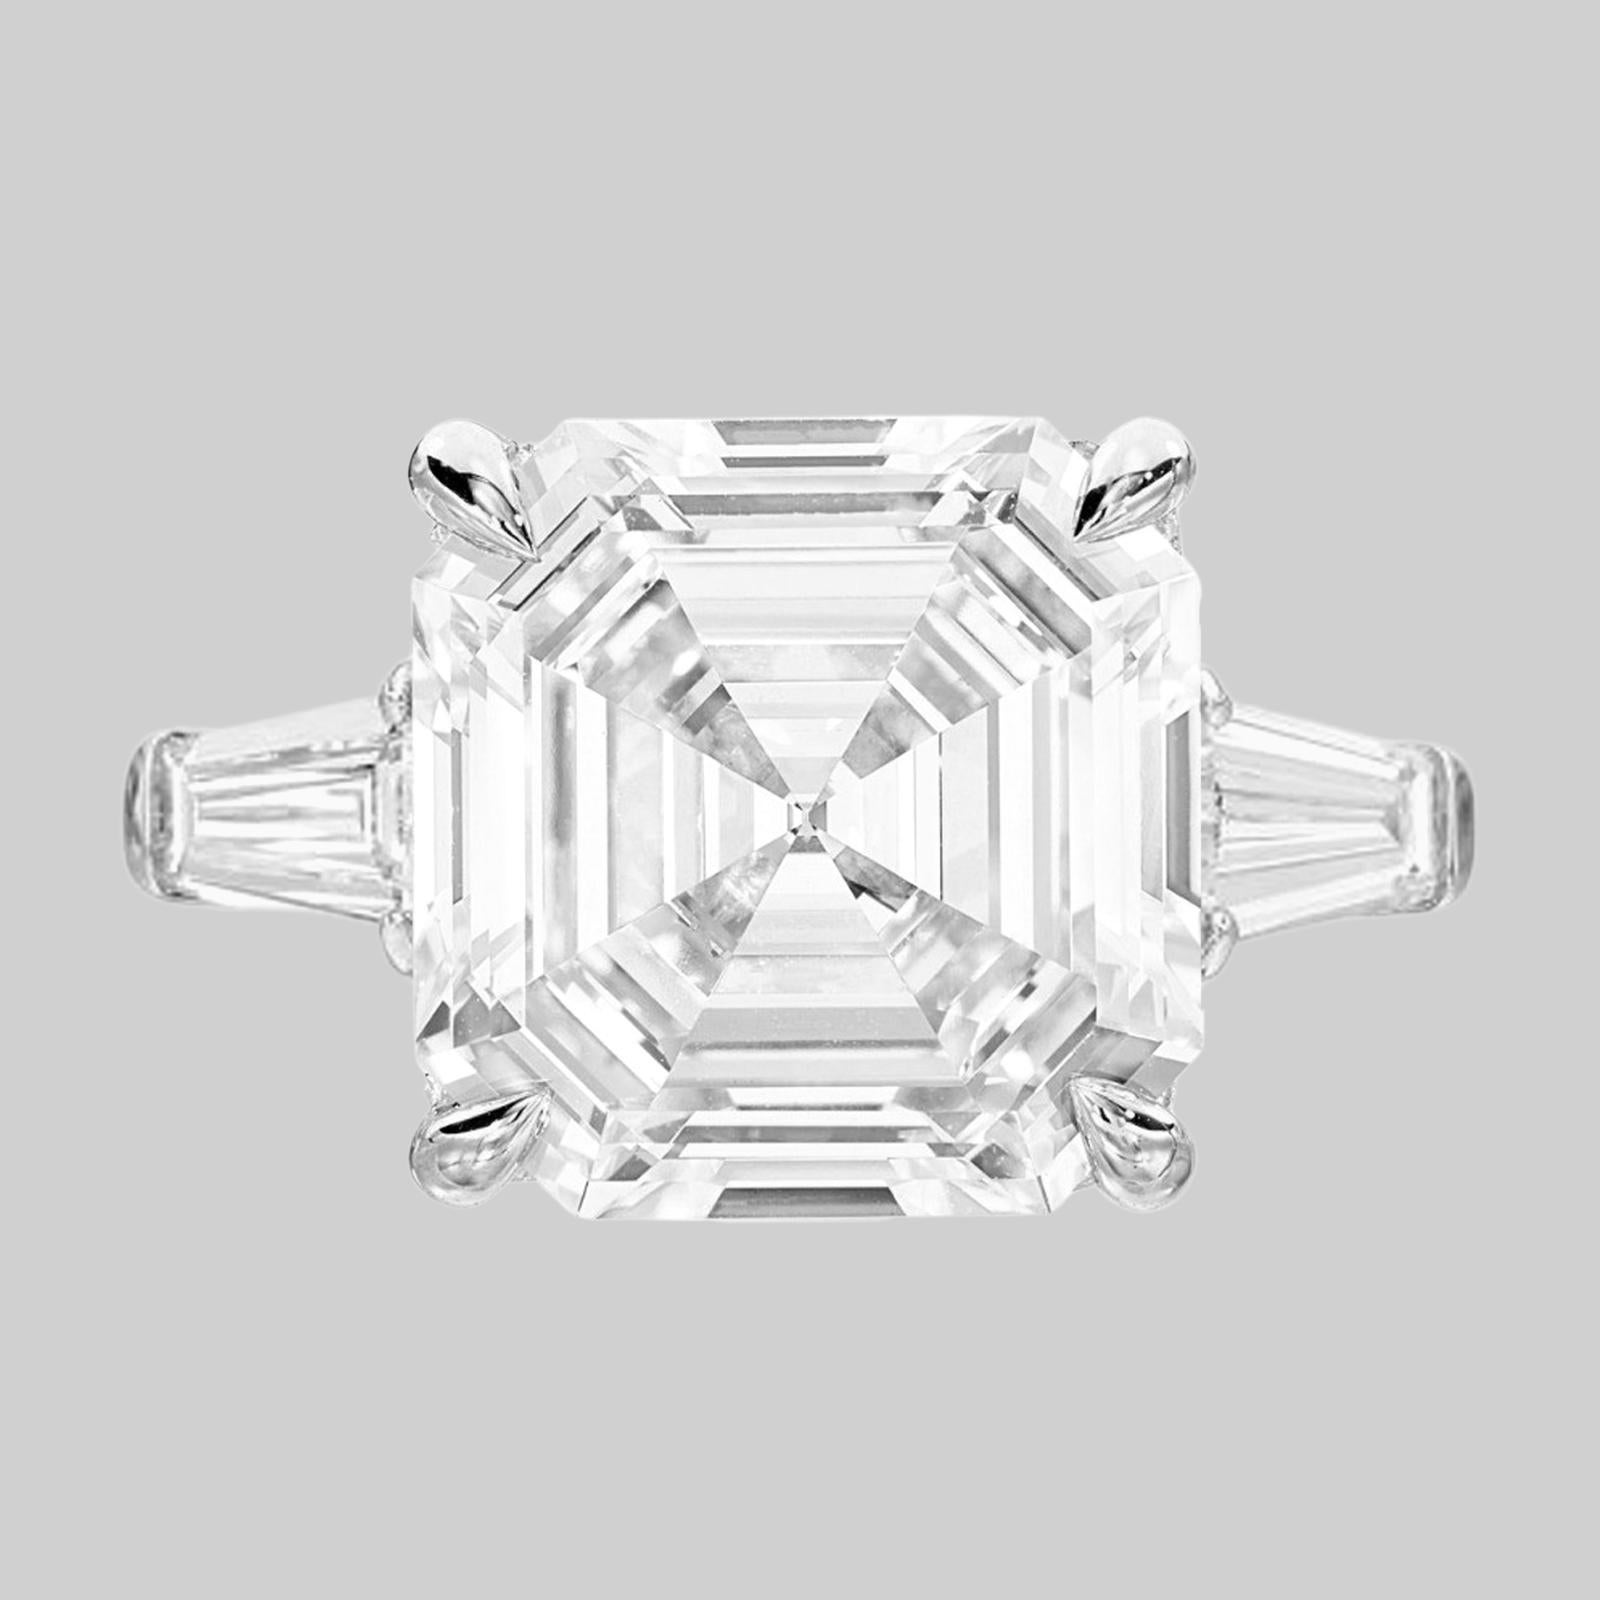 Any Asscher-cut lover will fall for this nearly nine carat diamond classic engagement ring with its ideal platinum proportions, mirrored depths, and broad flashes of white light. The emerald-cut diamond was the result of increasing precision and